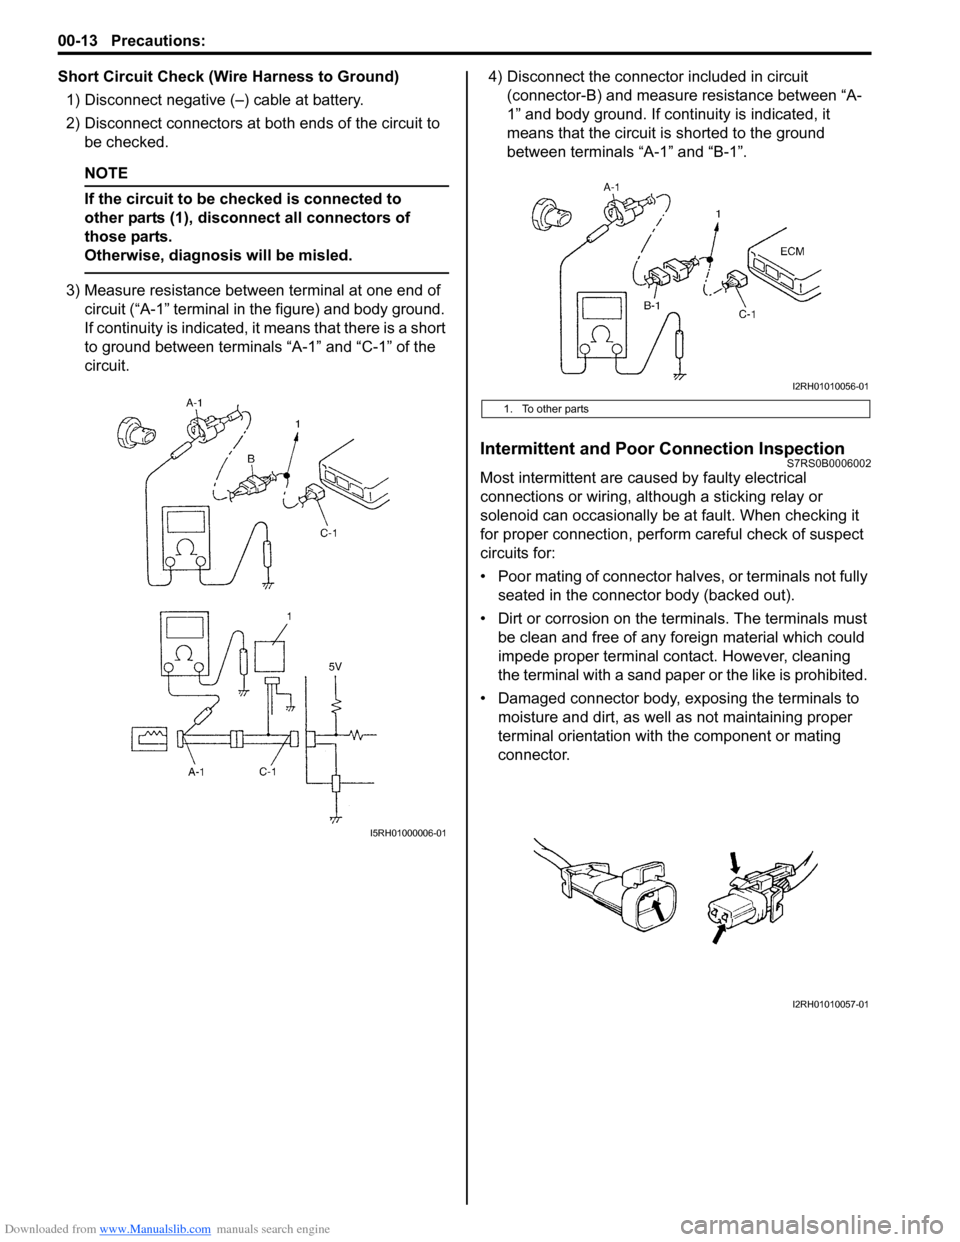 SUZUKI SWIFT 2008 2.G Service Workshop Manual Downloaded from www.Manualslib.com manuals search engine 00-13 Precautions: 
Short Circuit Check (Wire Harness to Ground)1) Disconnect negative (–) cable at battery.
2) Disconnect connectors at bot 